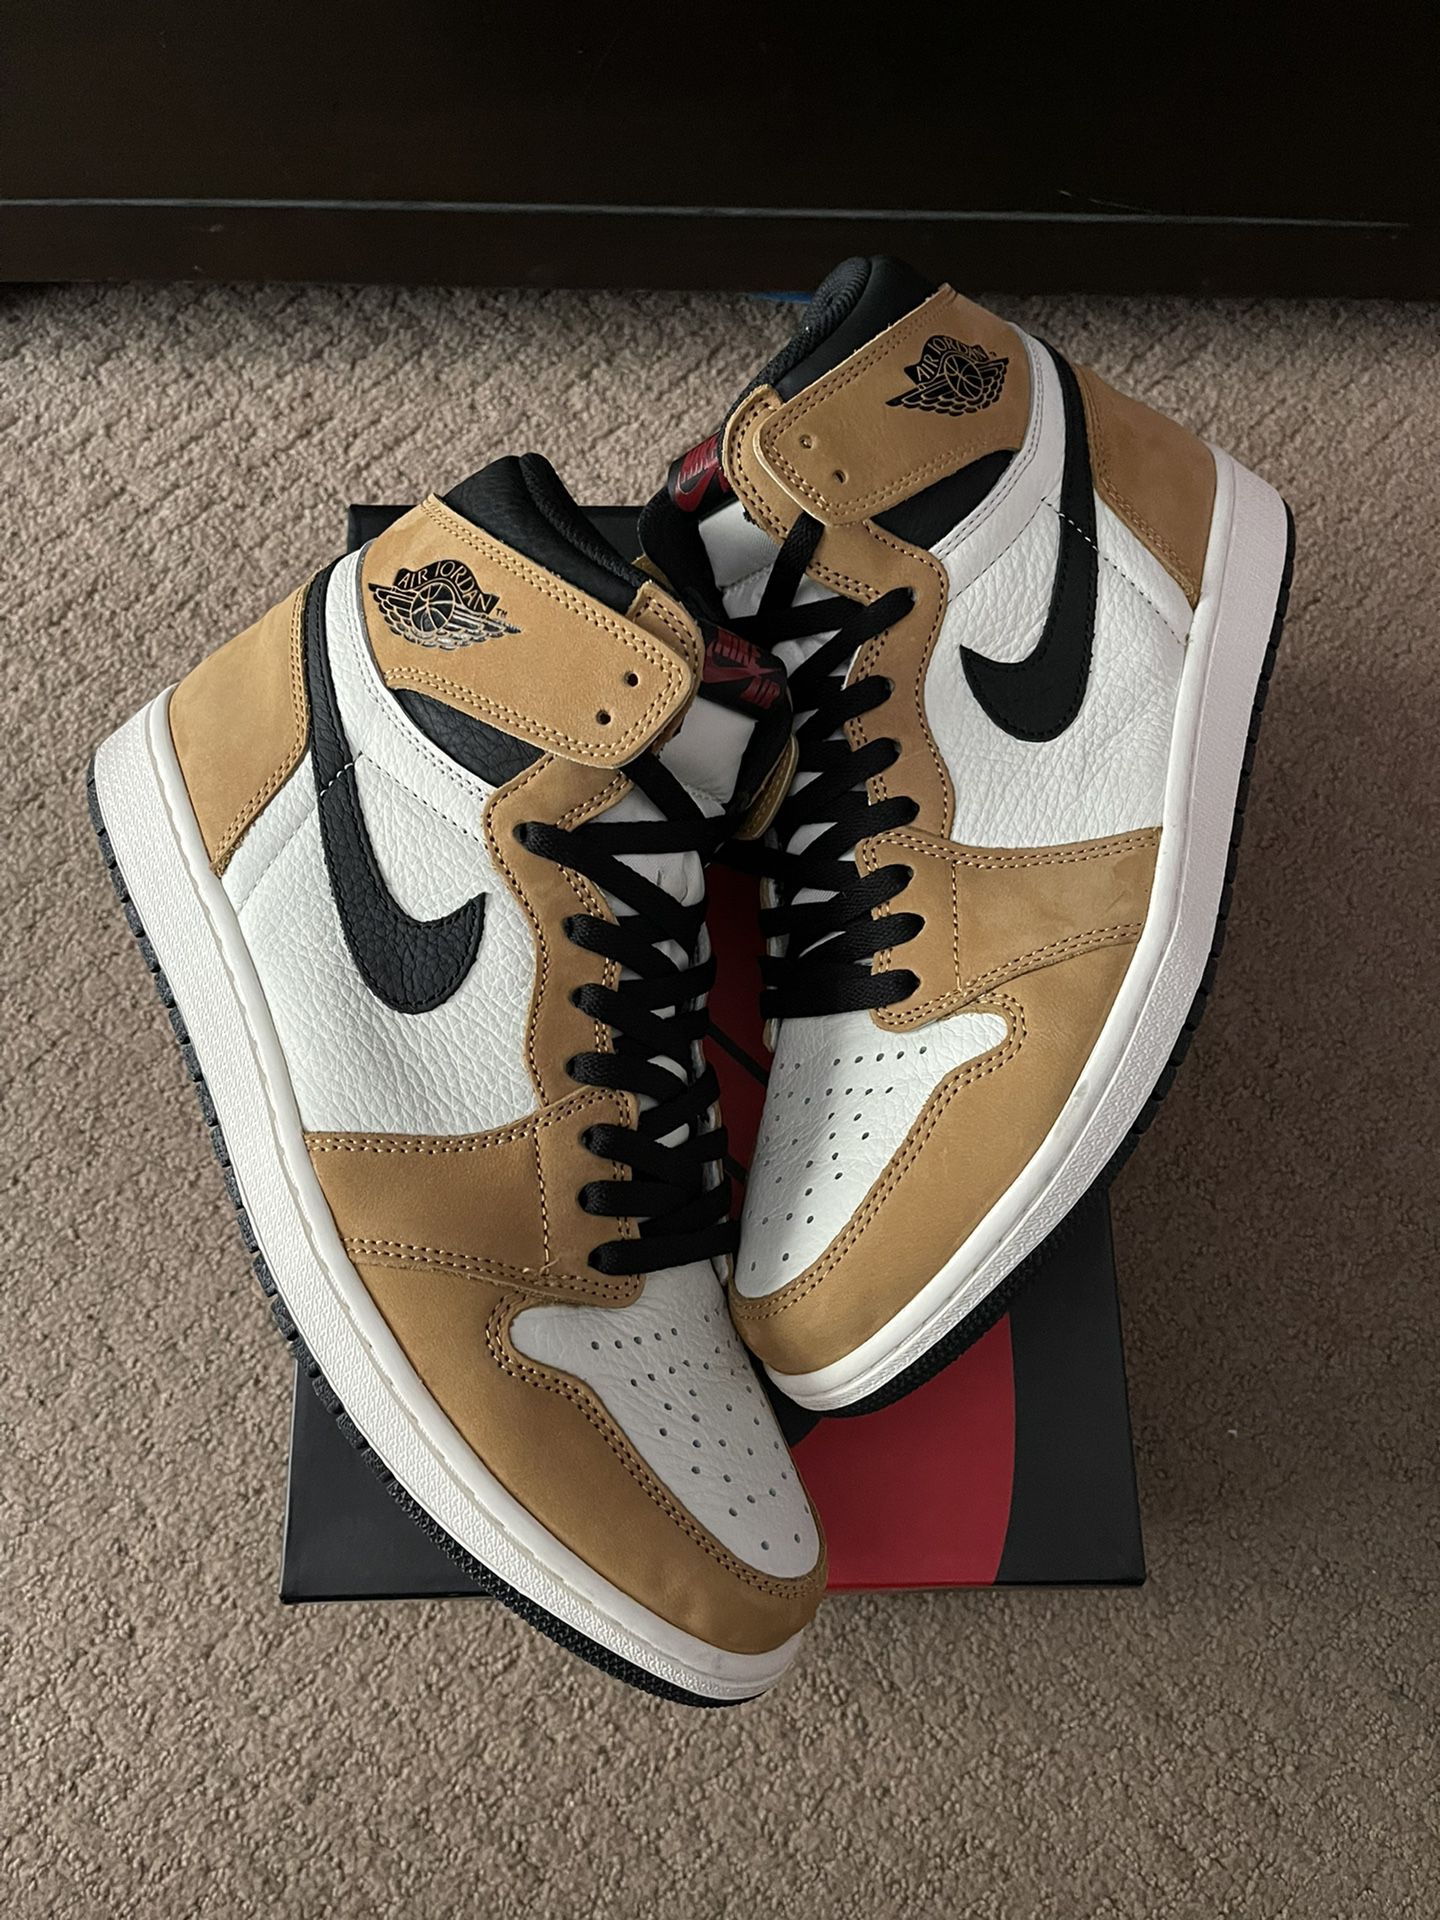 Detectar Mareo Noble Nike Air Jordan 1 Rookie of the Year size 12 for Sale in Thousand Oaks, CA  - OfferUp